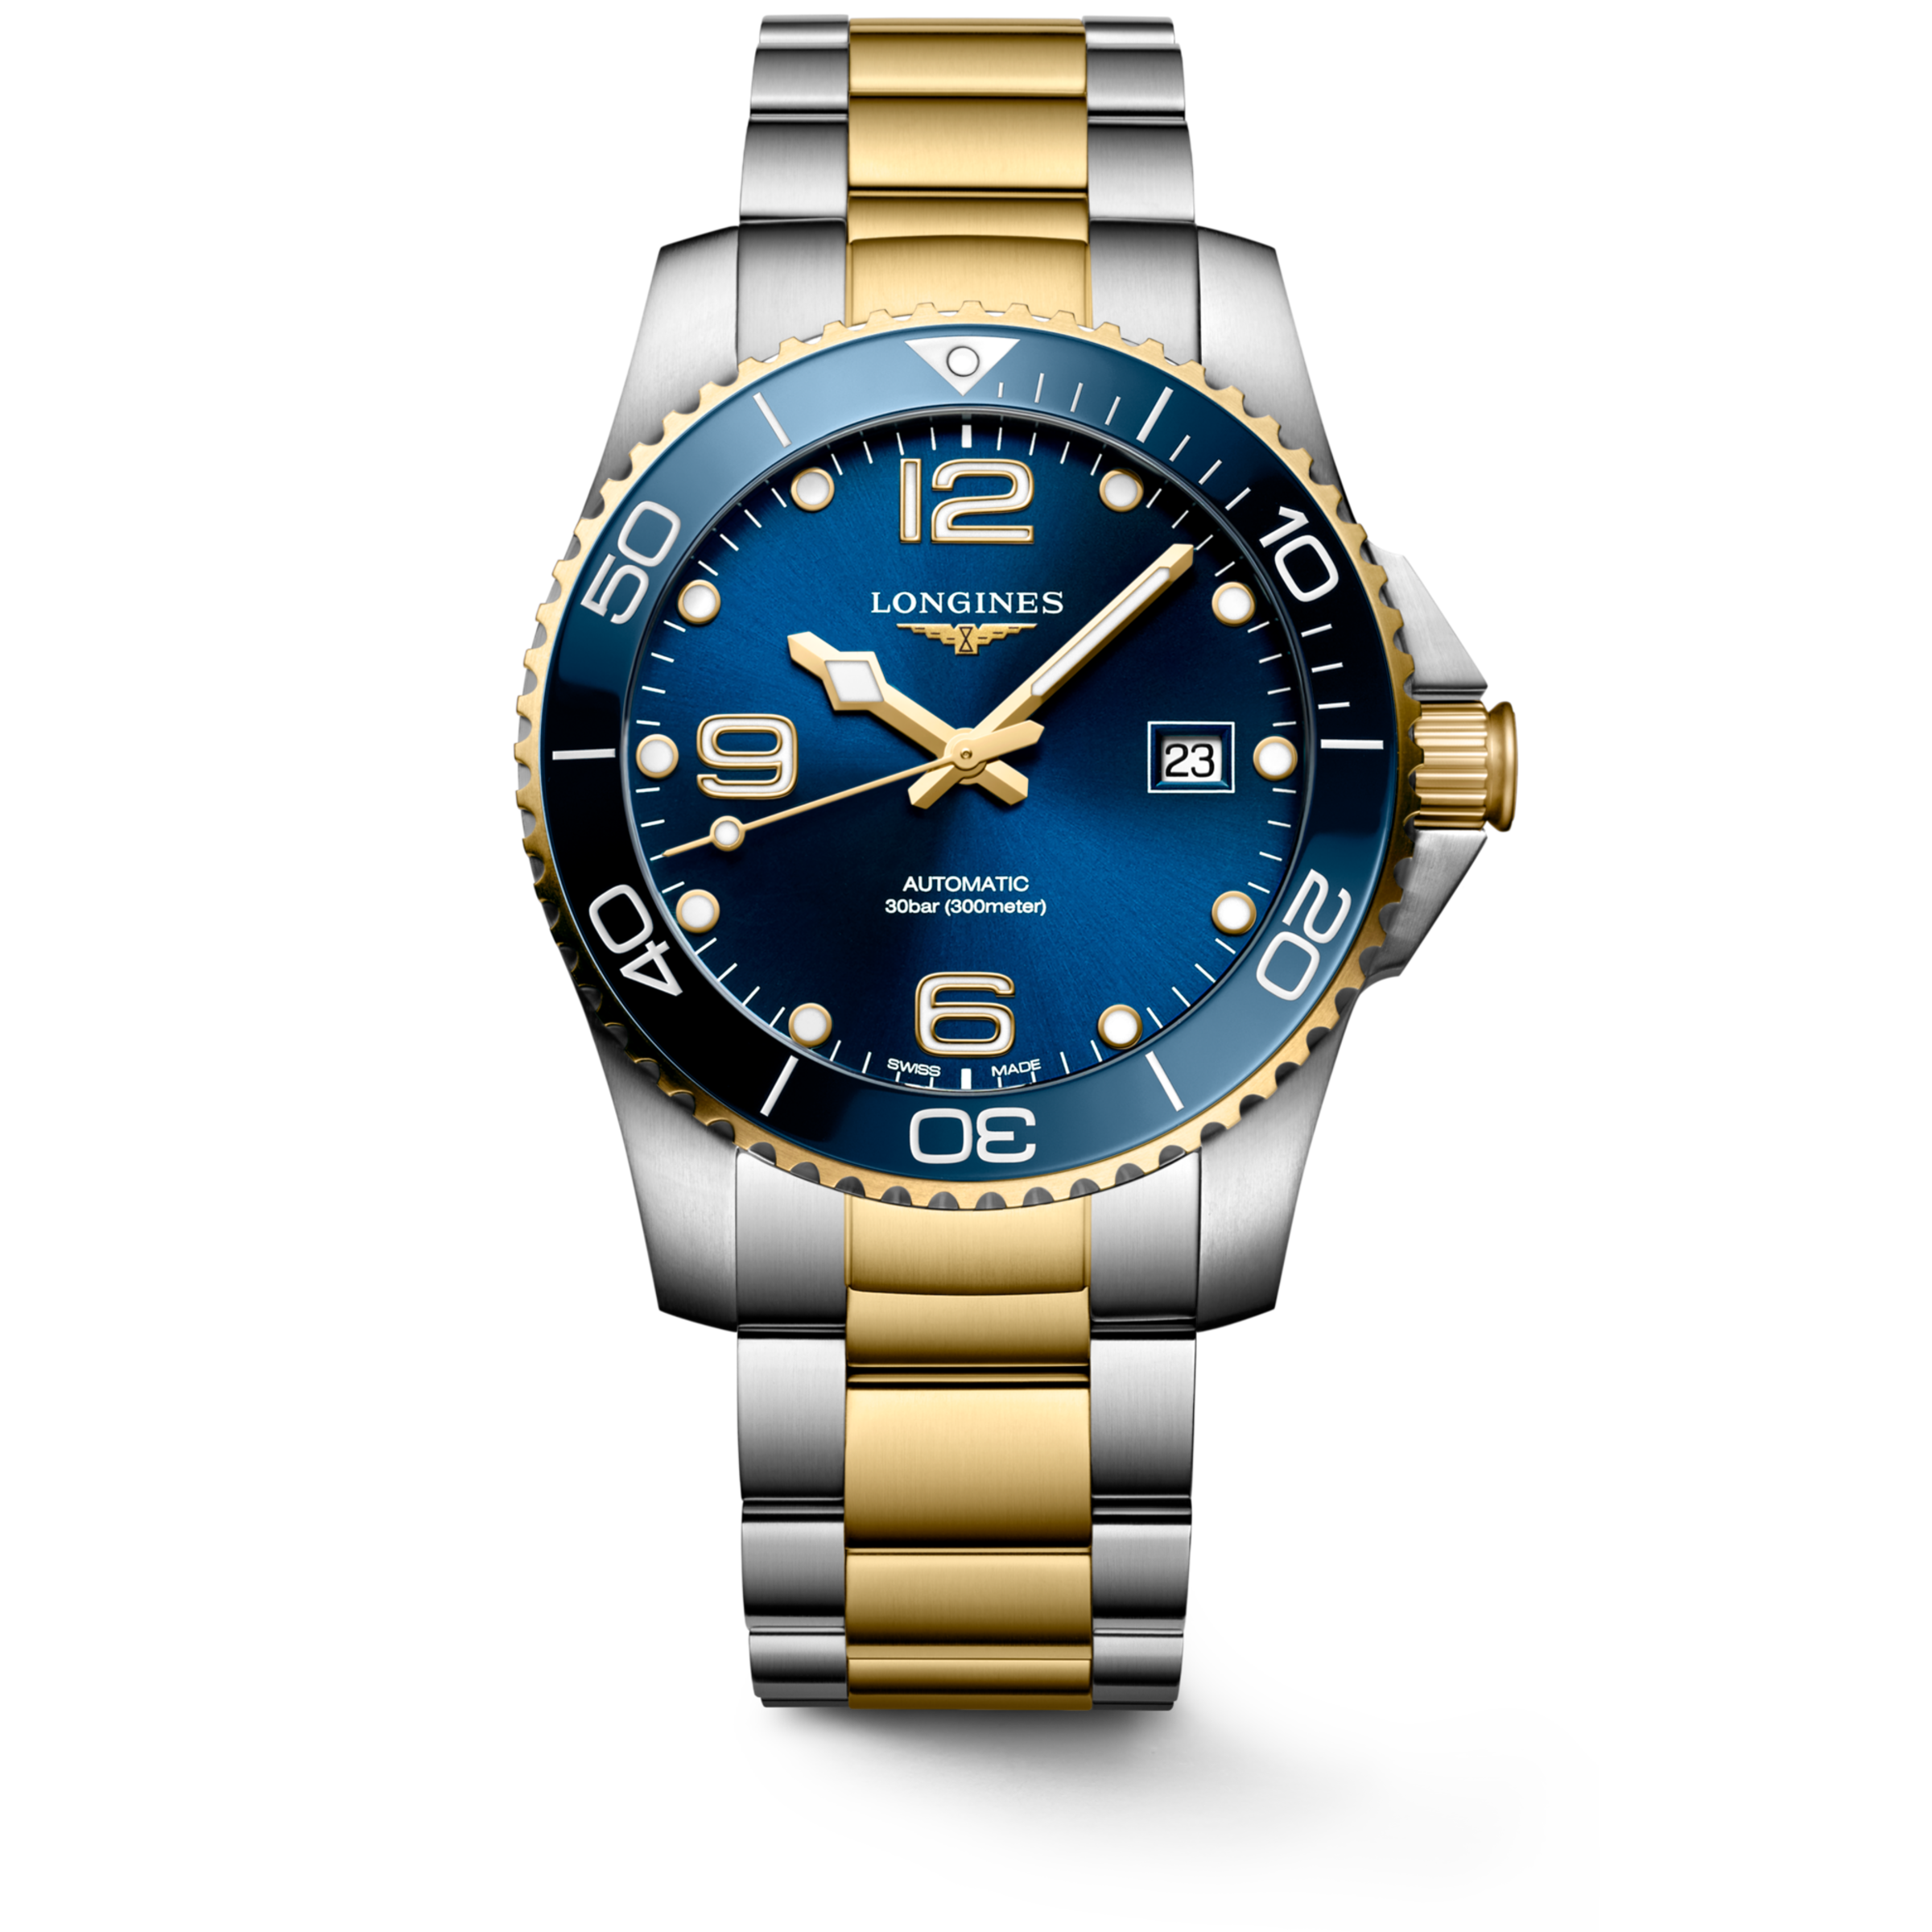 Longines HYDROCONQUEST Automatic Stainless steel and ceramic bezel Watch - L3.781.3.96.7